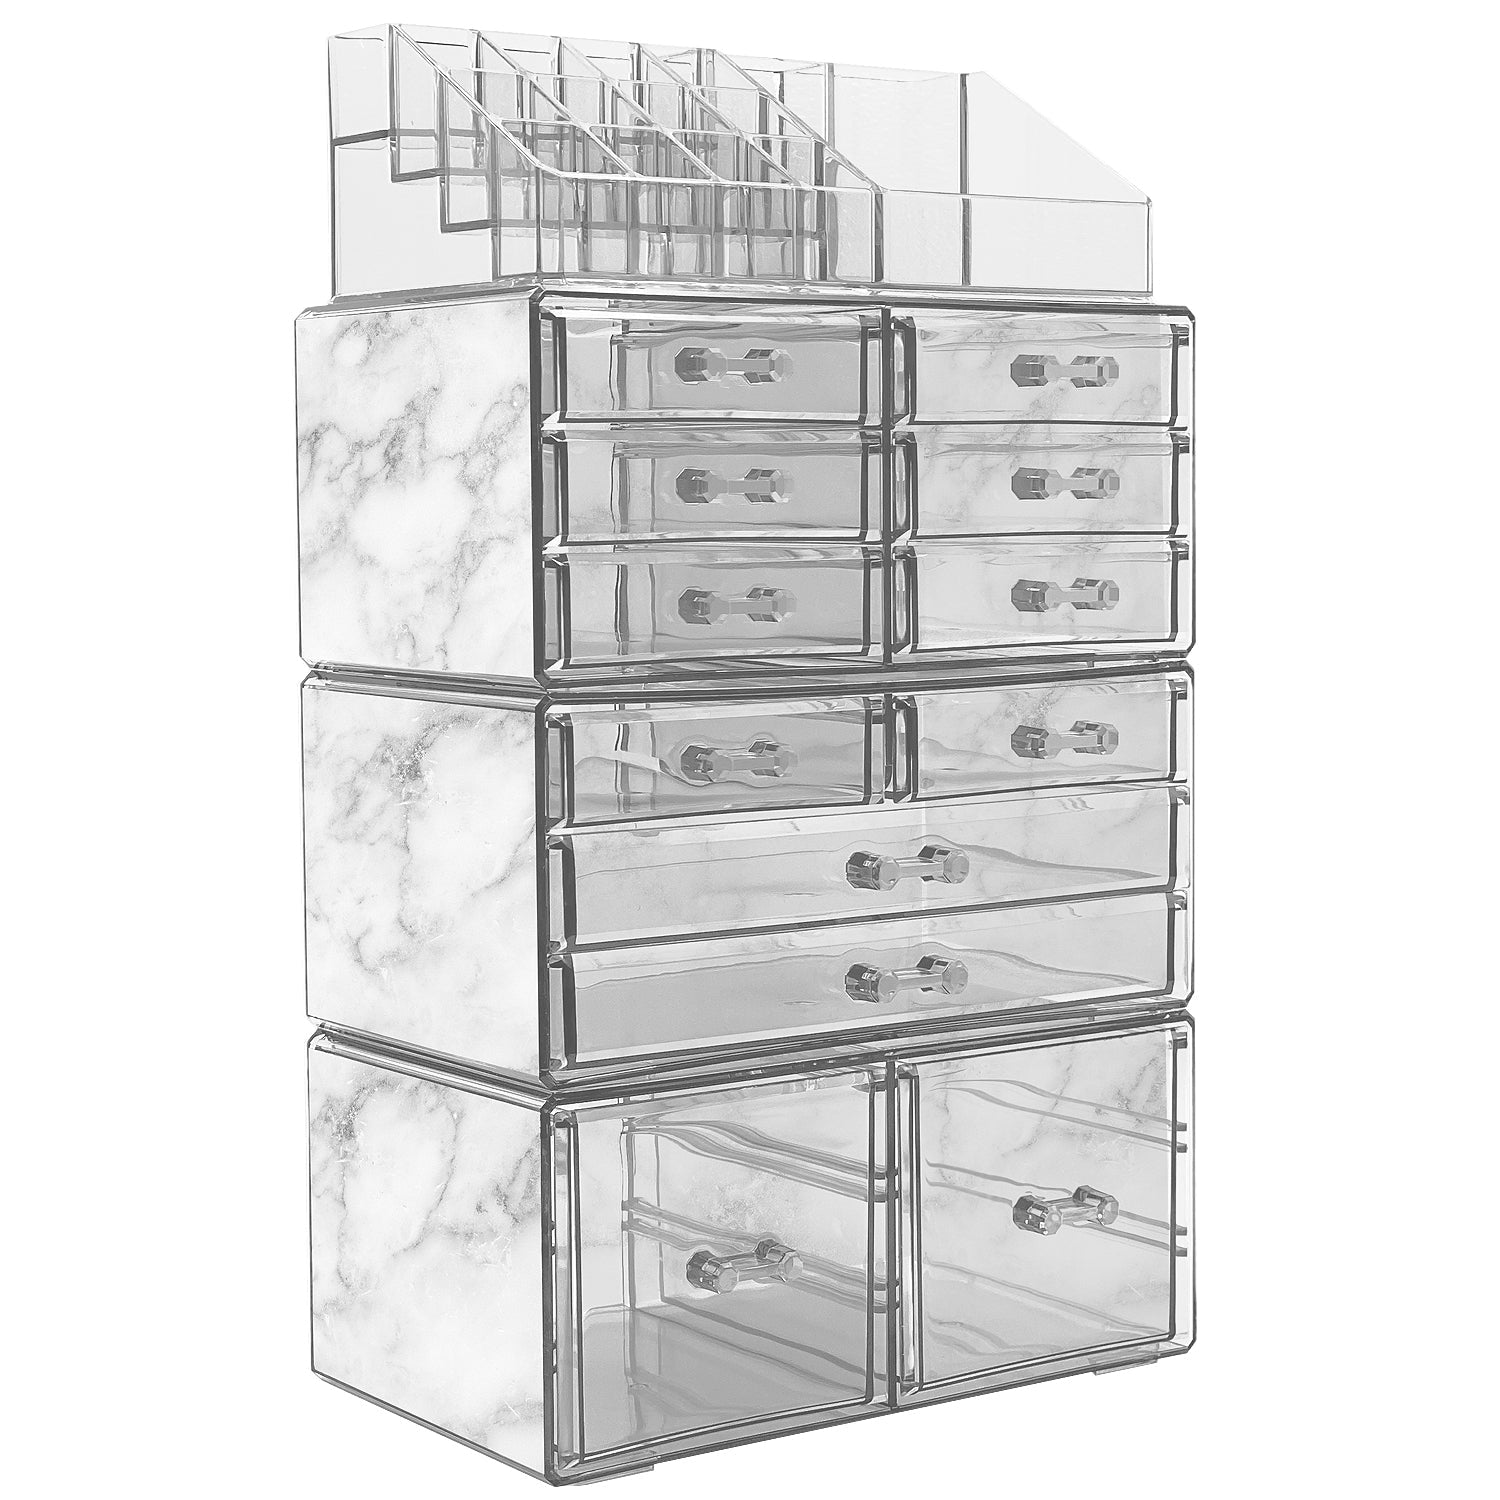 Luxury PS Dresser Marble Cosmetic Make up Drawers Collection Case